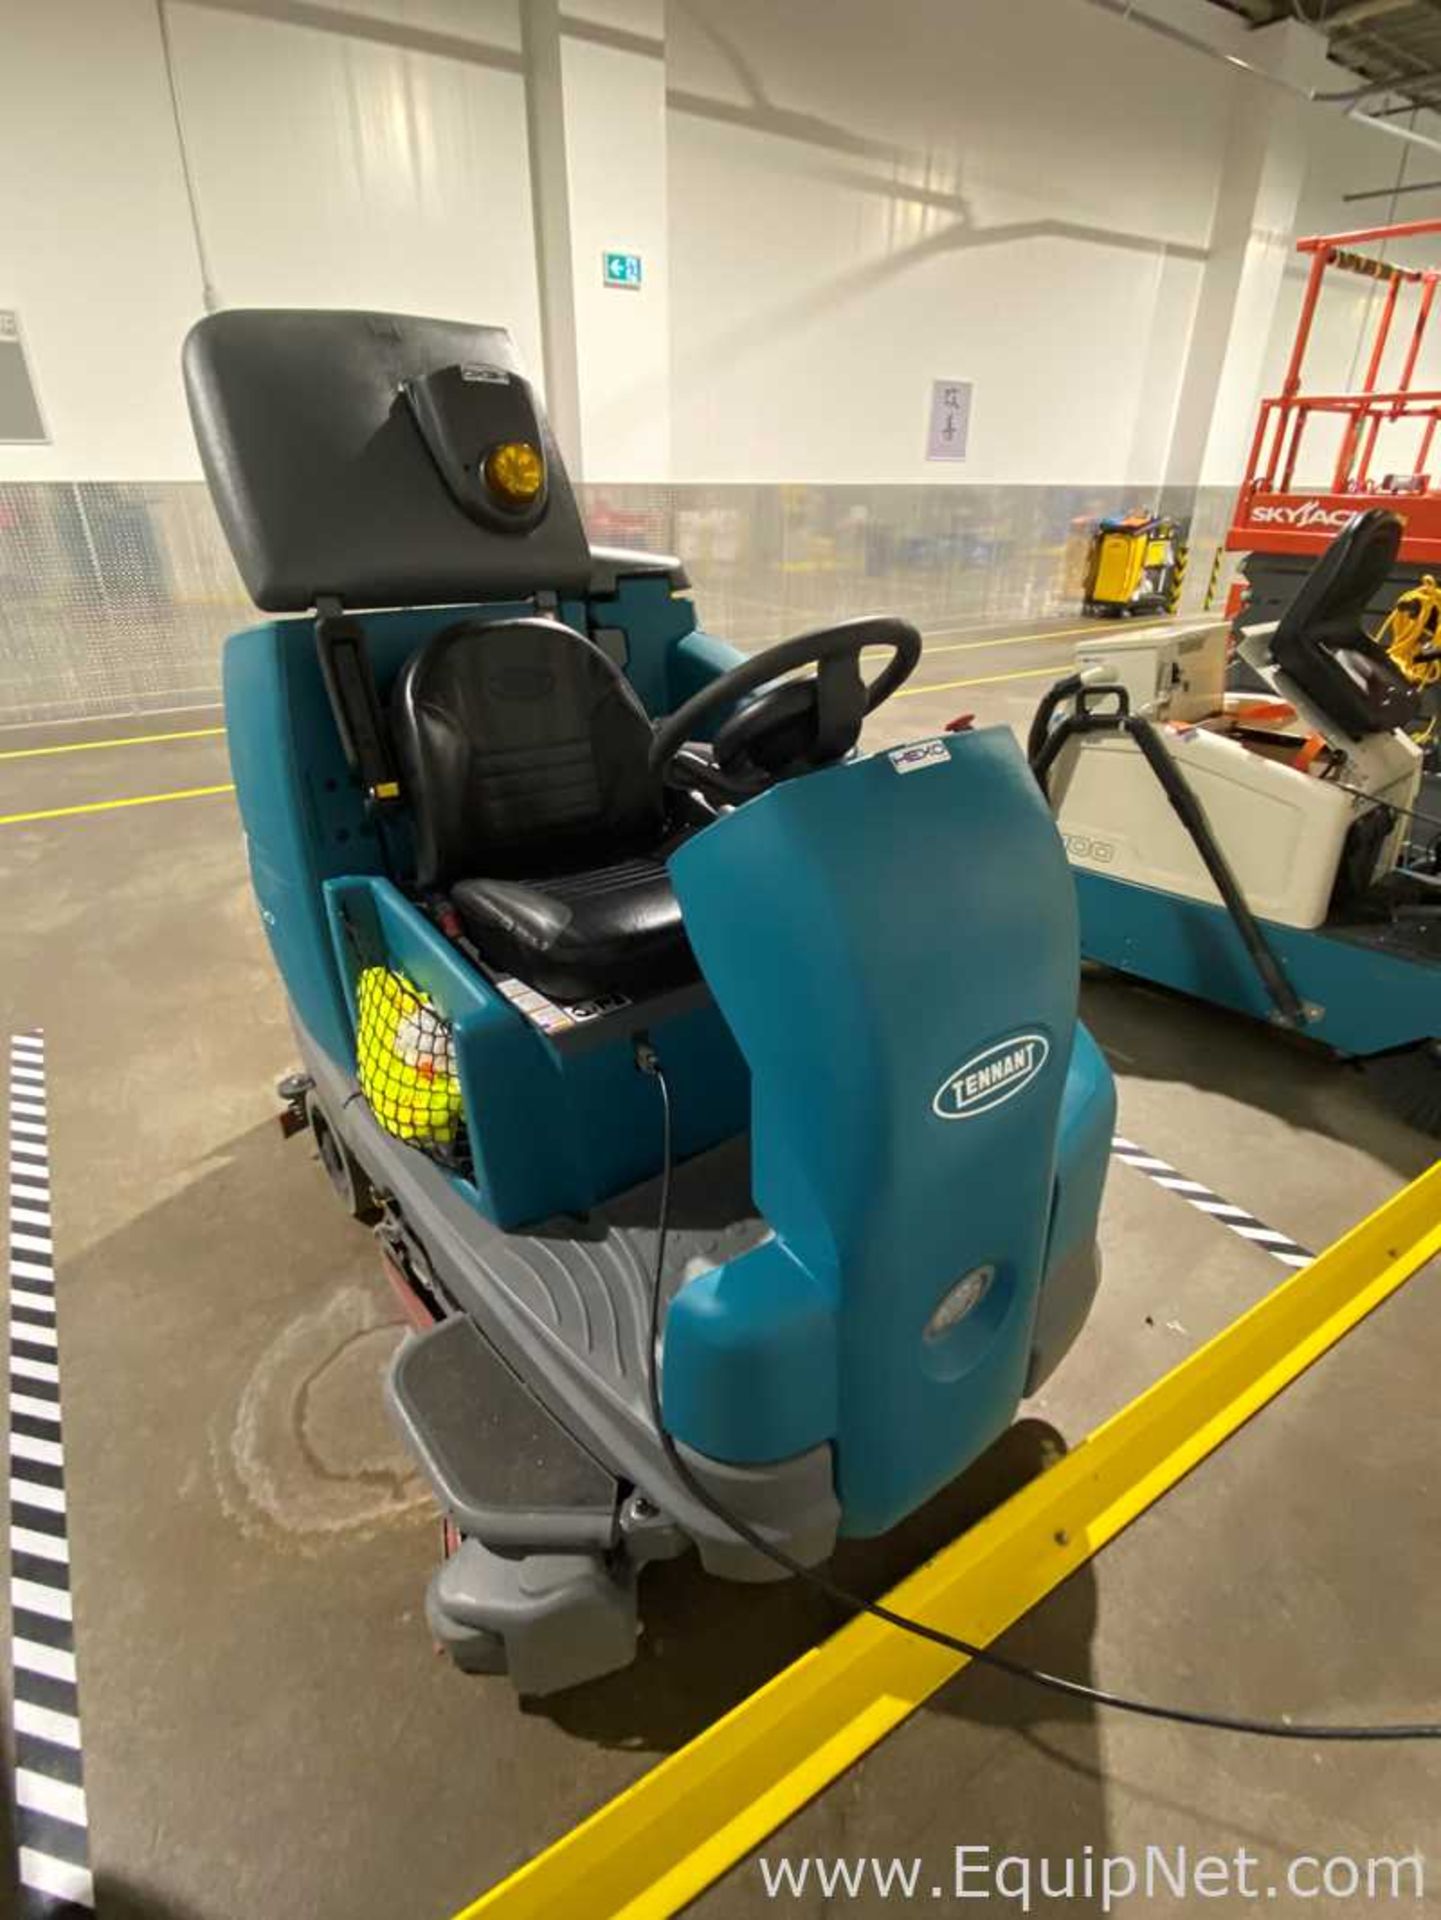 Tennant T16 Floor Scrubber - Image 4 of 8